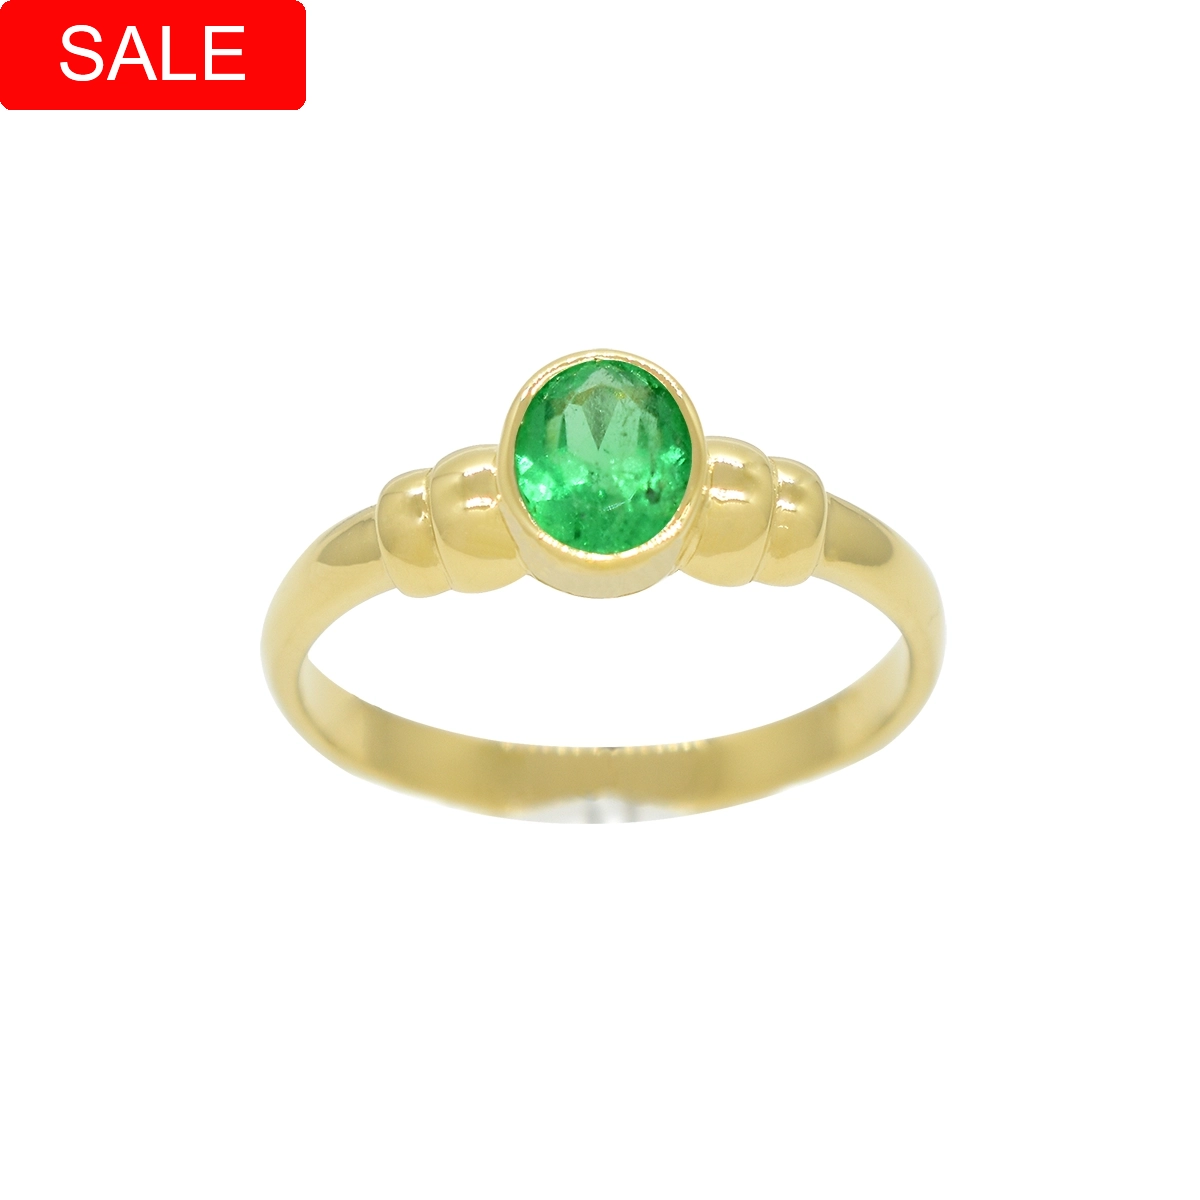 Solitaire emerald ring custom made in 18K yellow gold with green brilliant color natural Colombian emerald as its centerpiece